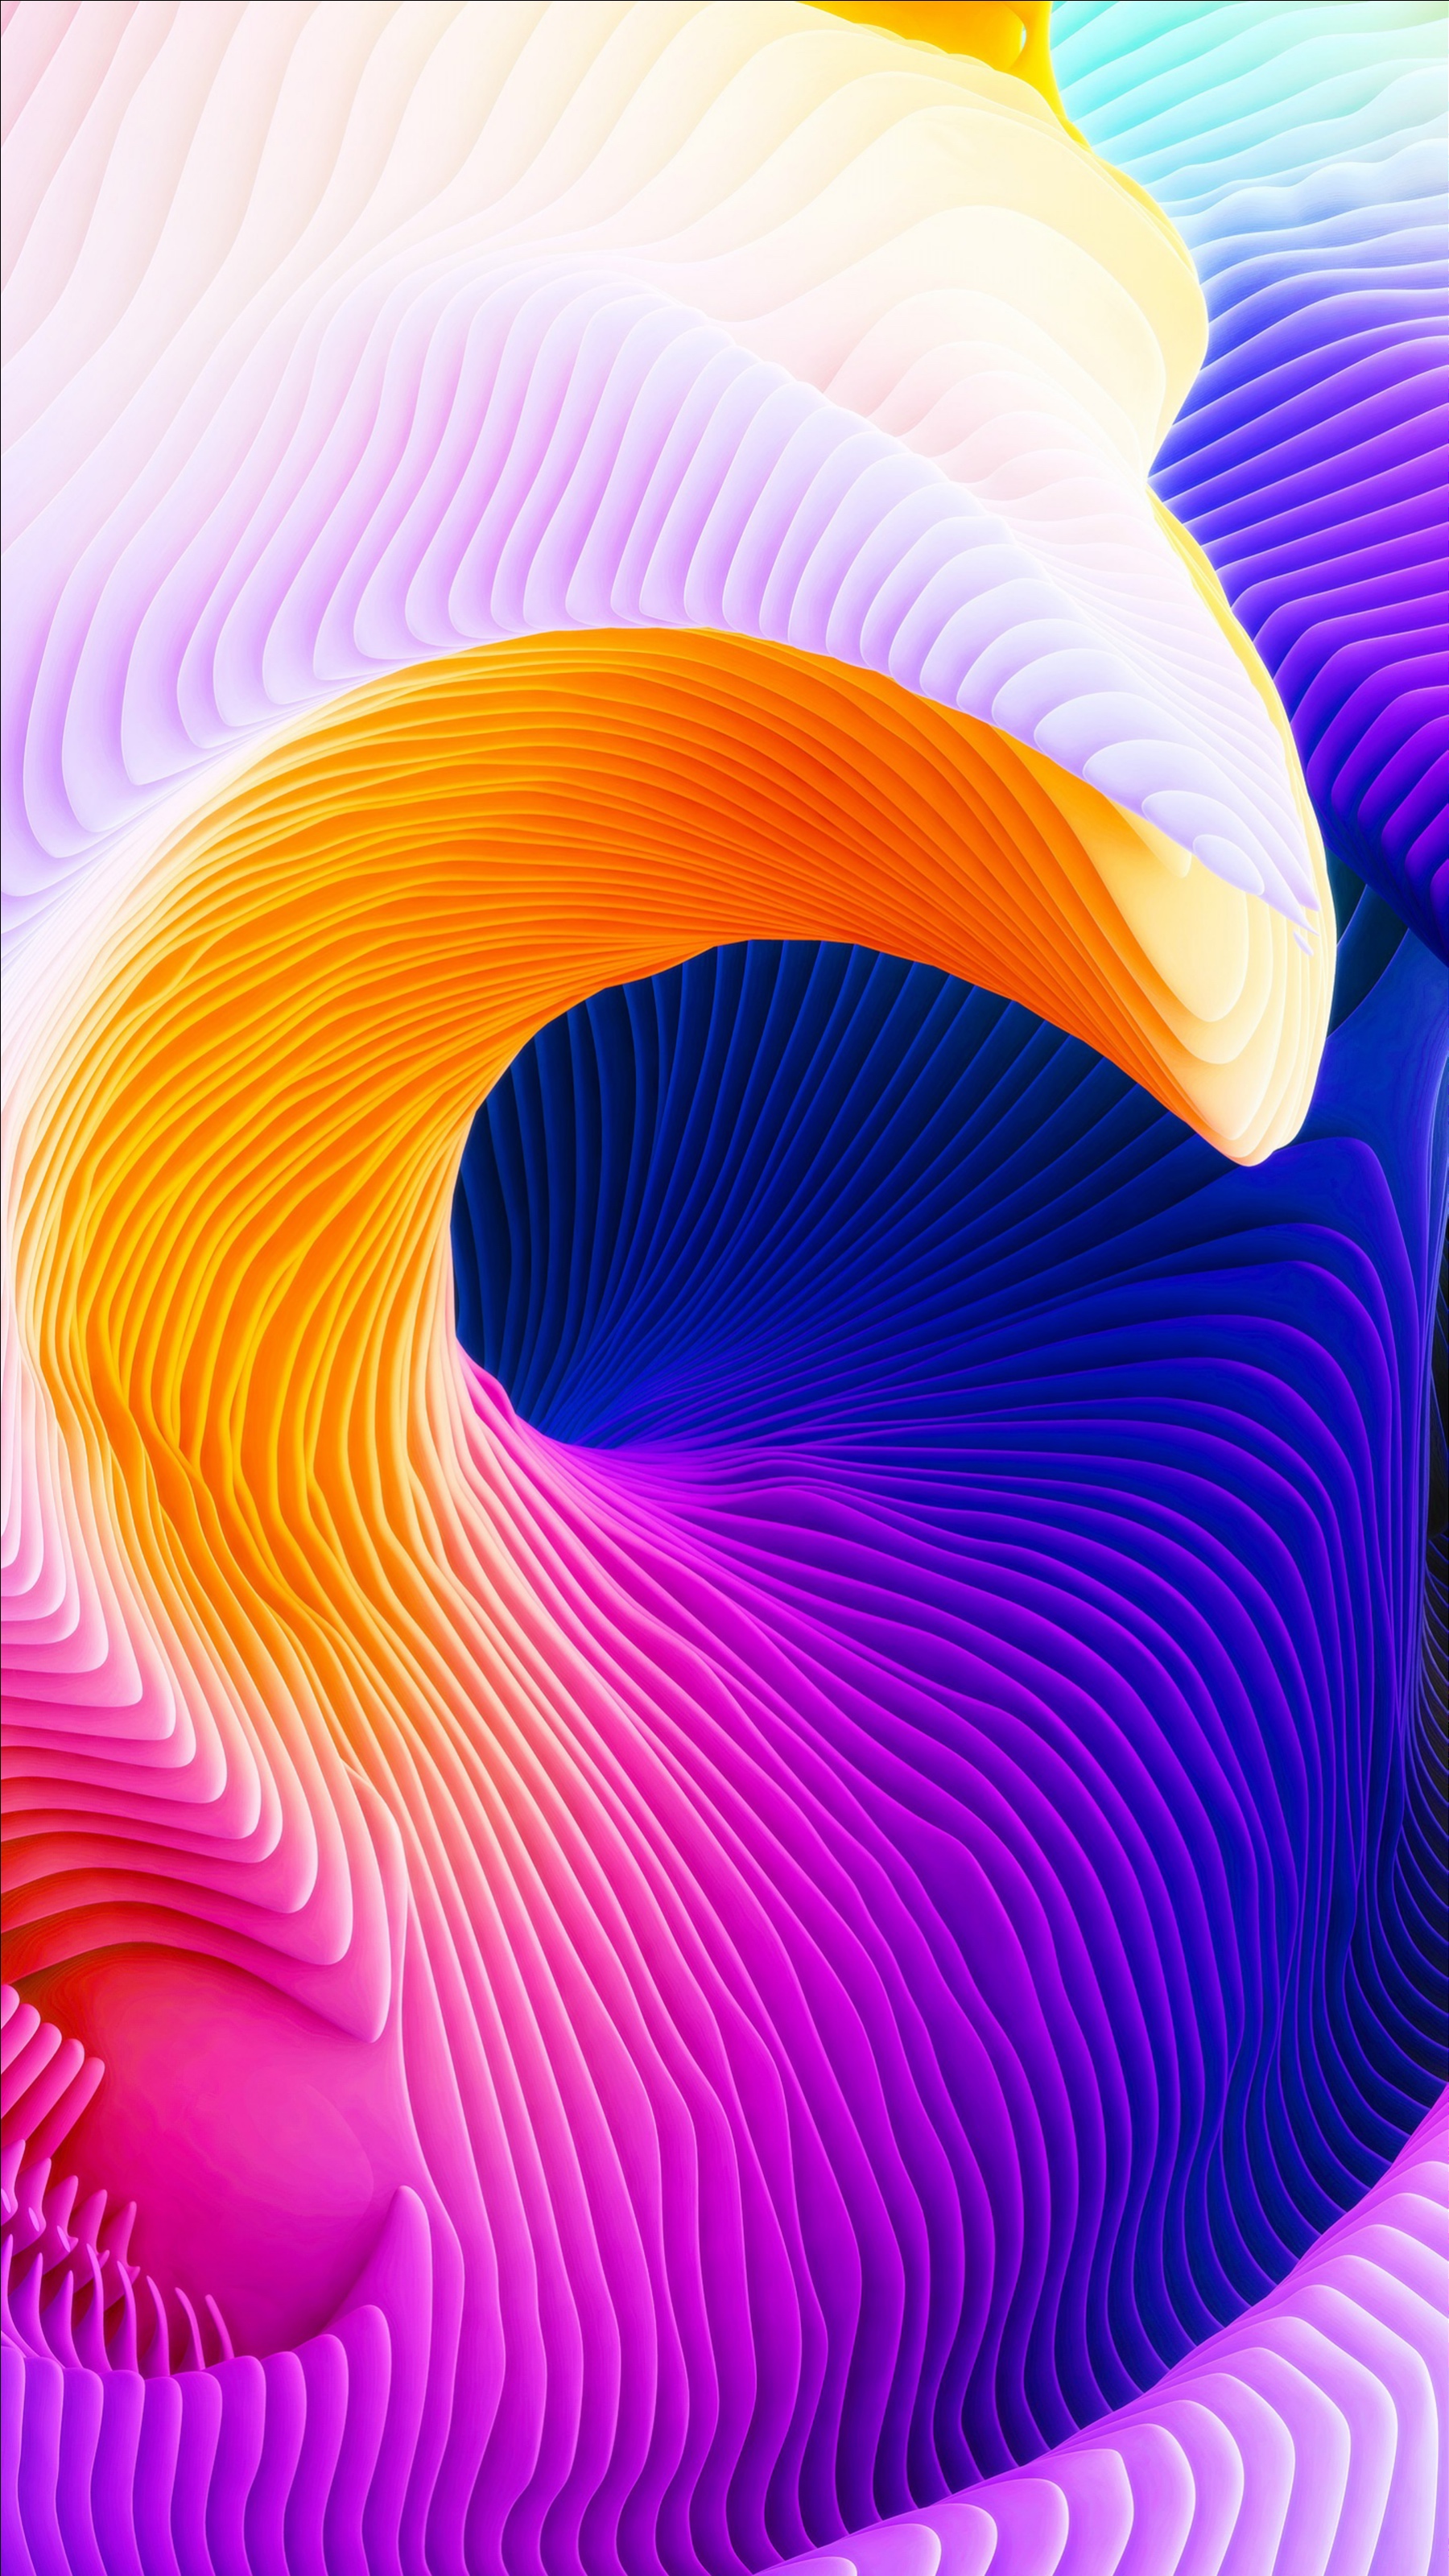 3d, winding, surface, relief, sinuous, raised 1080p